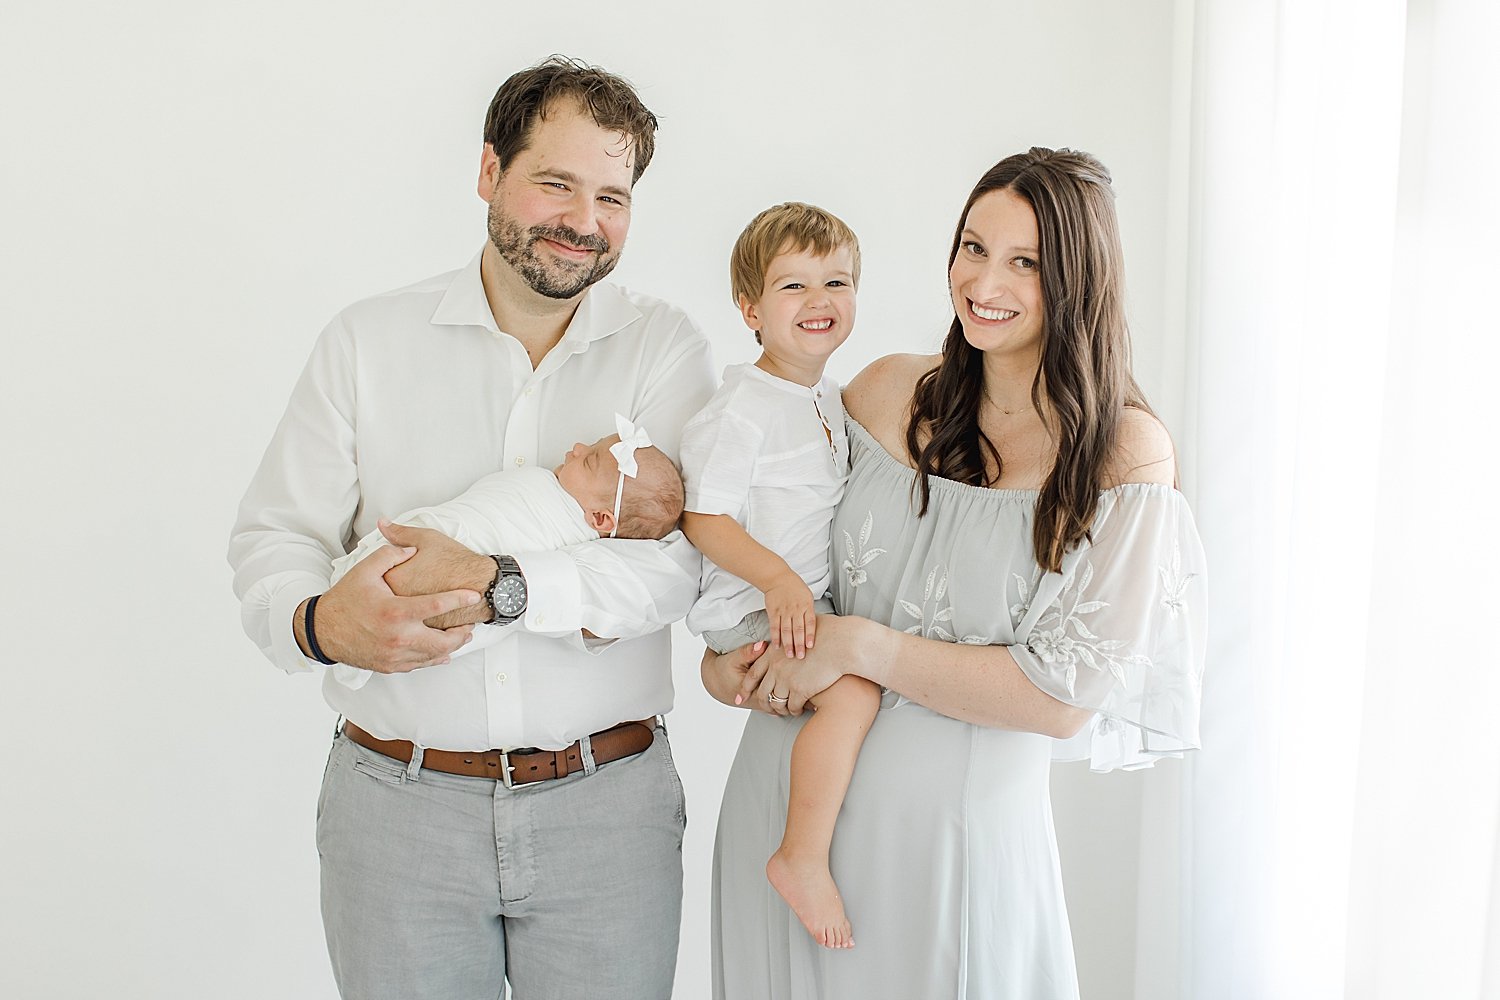 Family portraits with parents, big brother and newborn baby sister | Kristin Wood Photography